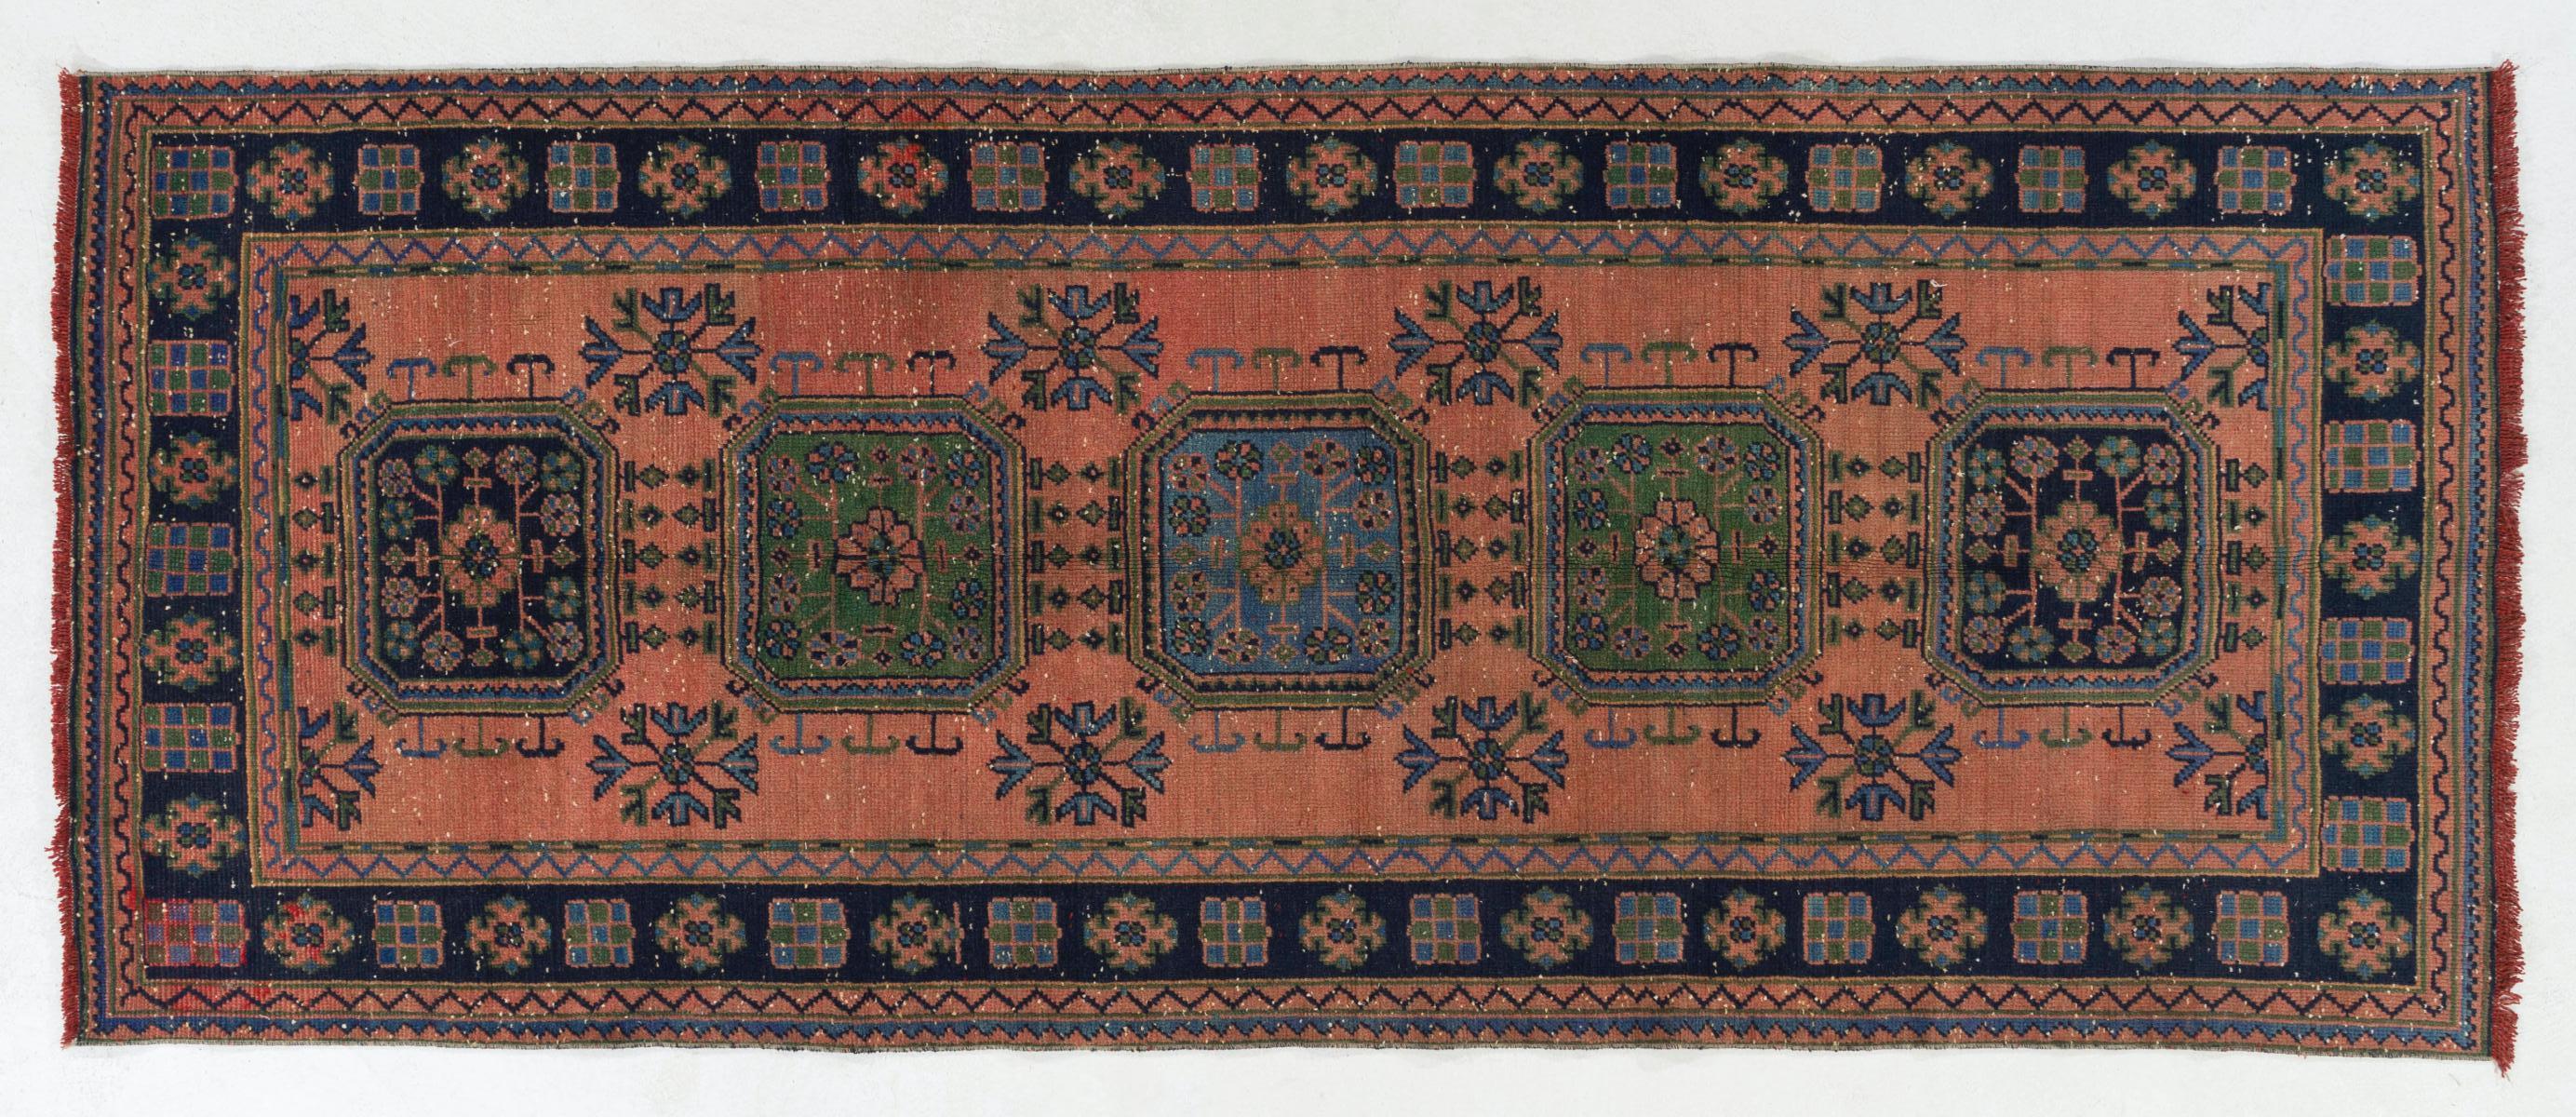 4.7x11 Ft Vintage Turkish Runner Rug, One of a kind Handmade Hallway Carpet In Good Condition For Sale In Philadelphia, PA